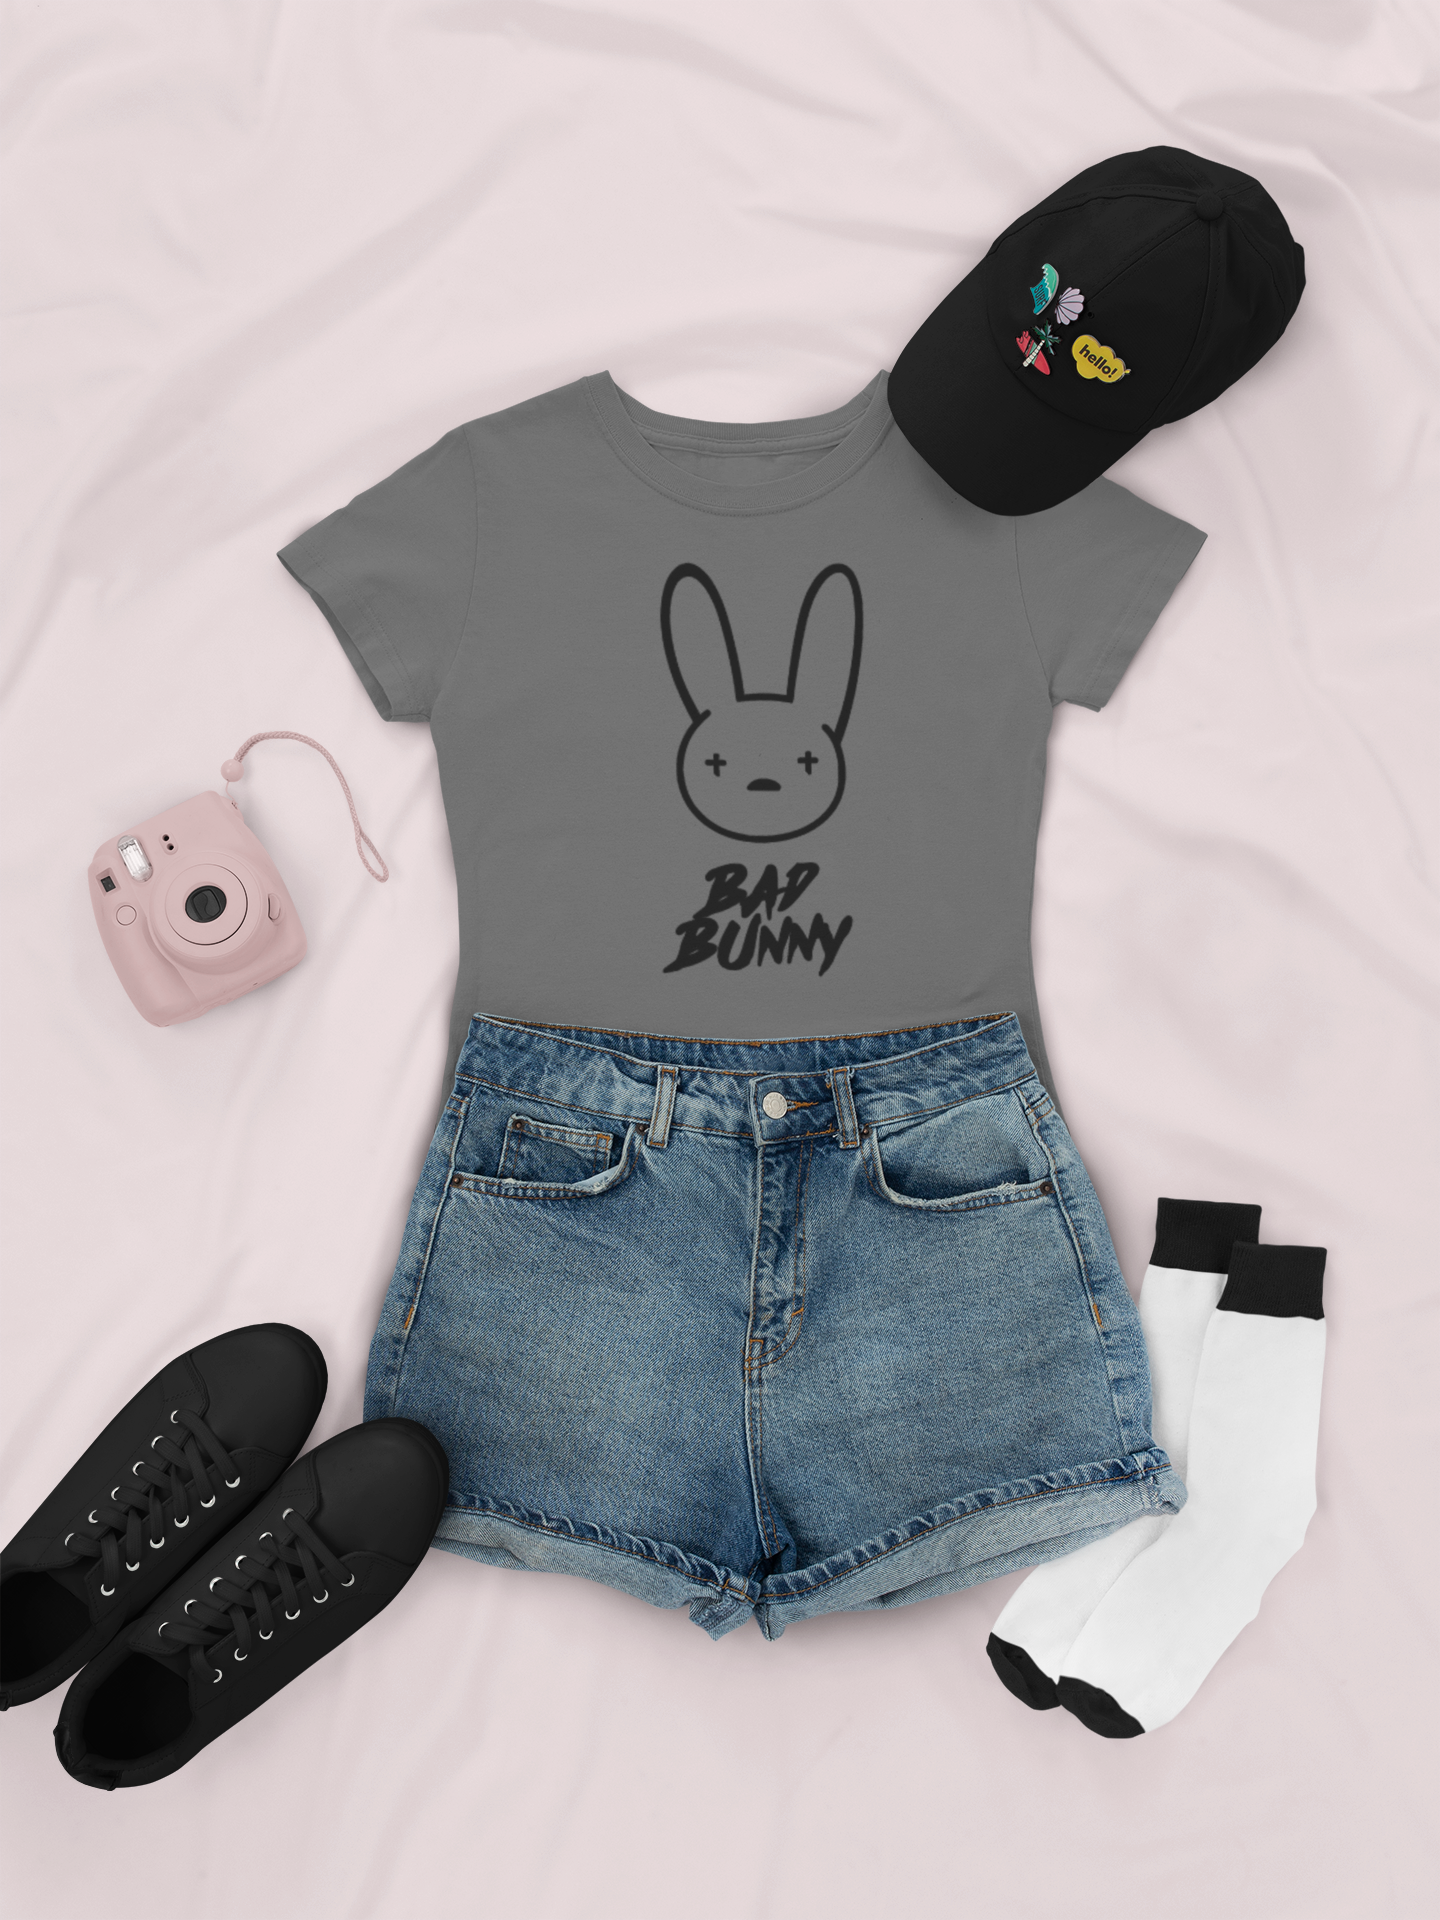 Best Bad Bunny Merch: Bad Bunny T-Shirts, Gifts, Toys to Shop Online